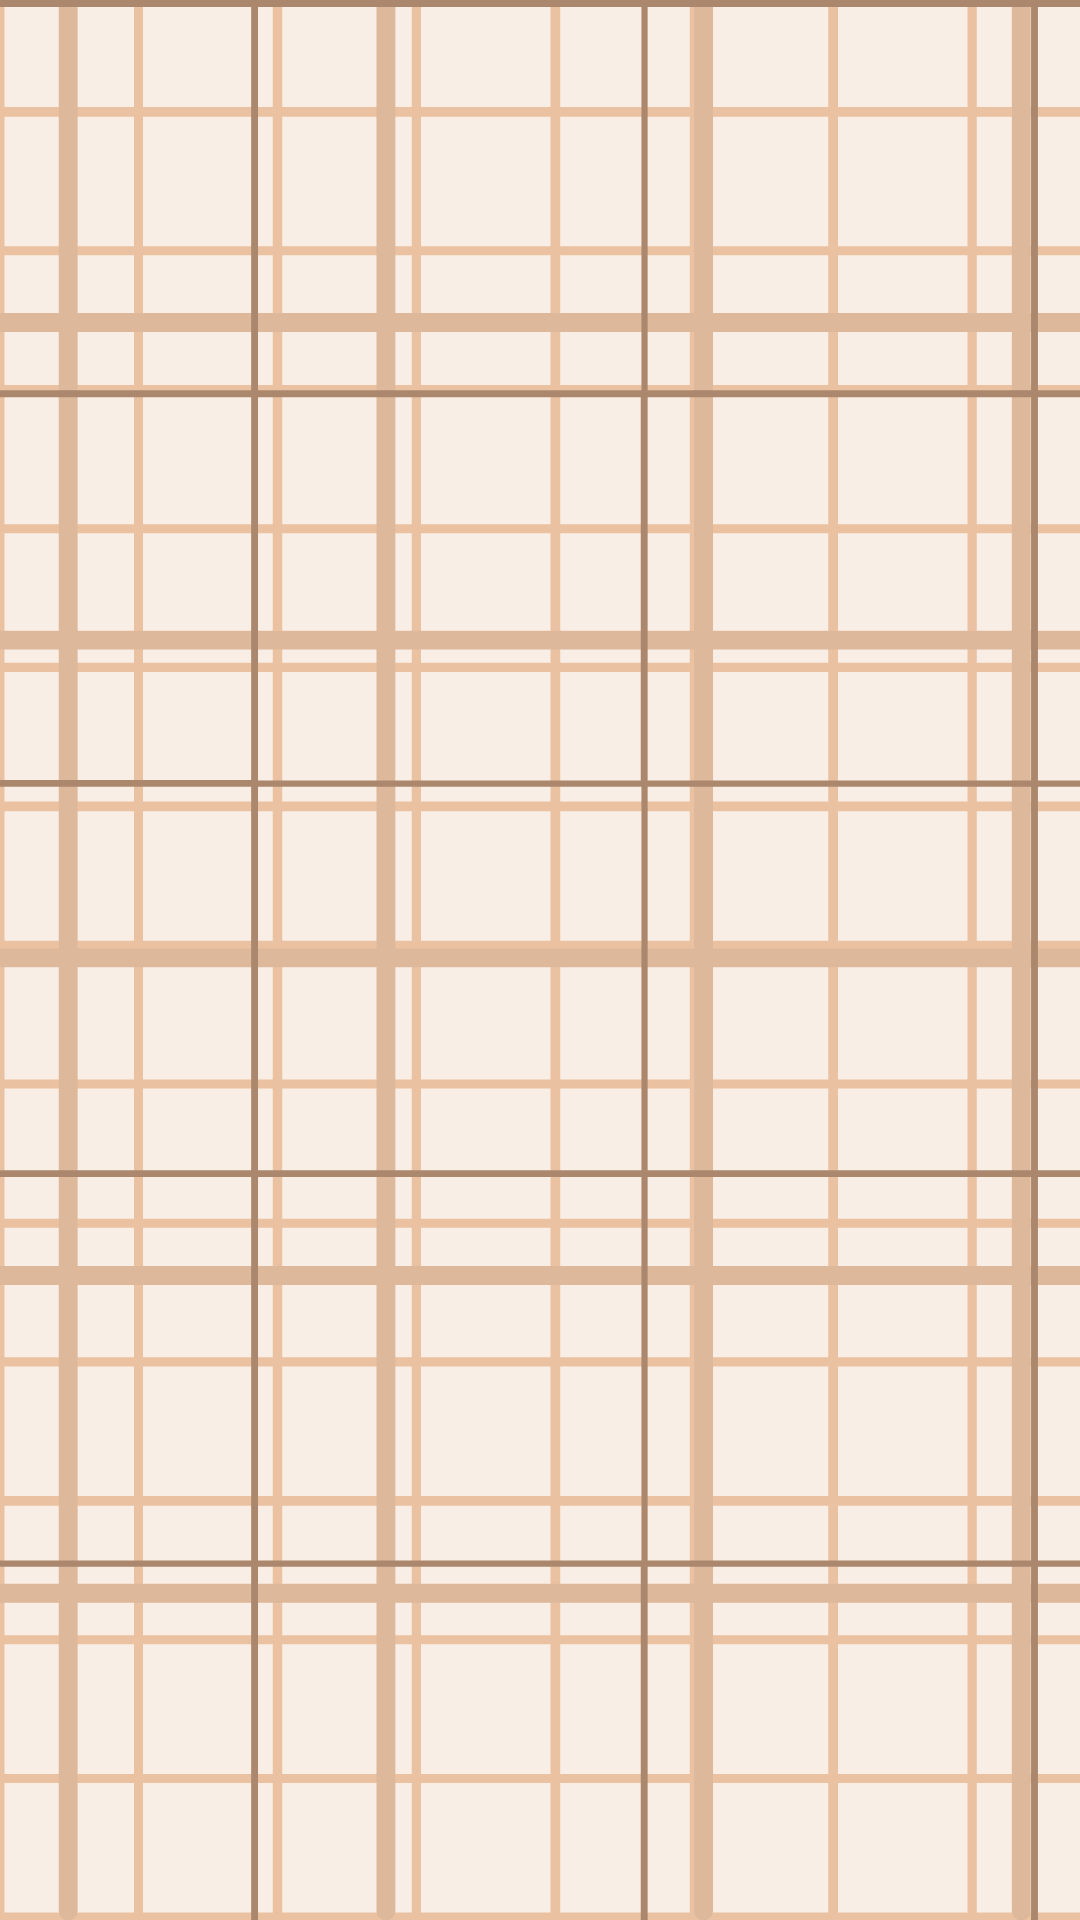 A tan and white checkered pattern - Grid